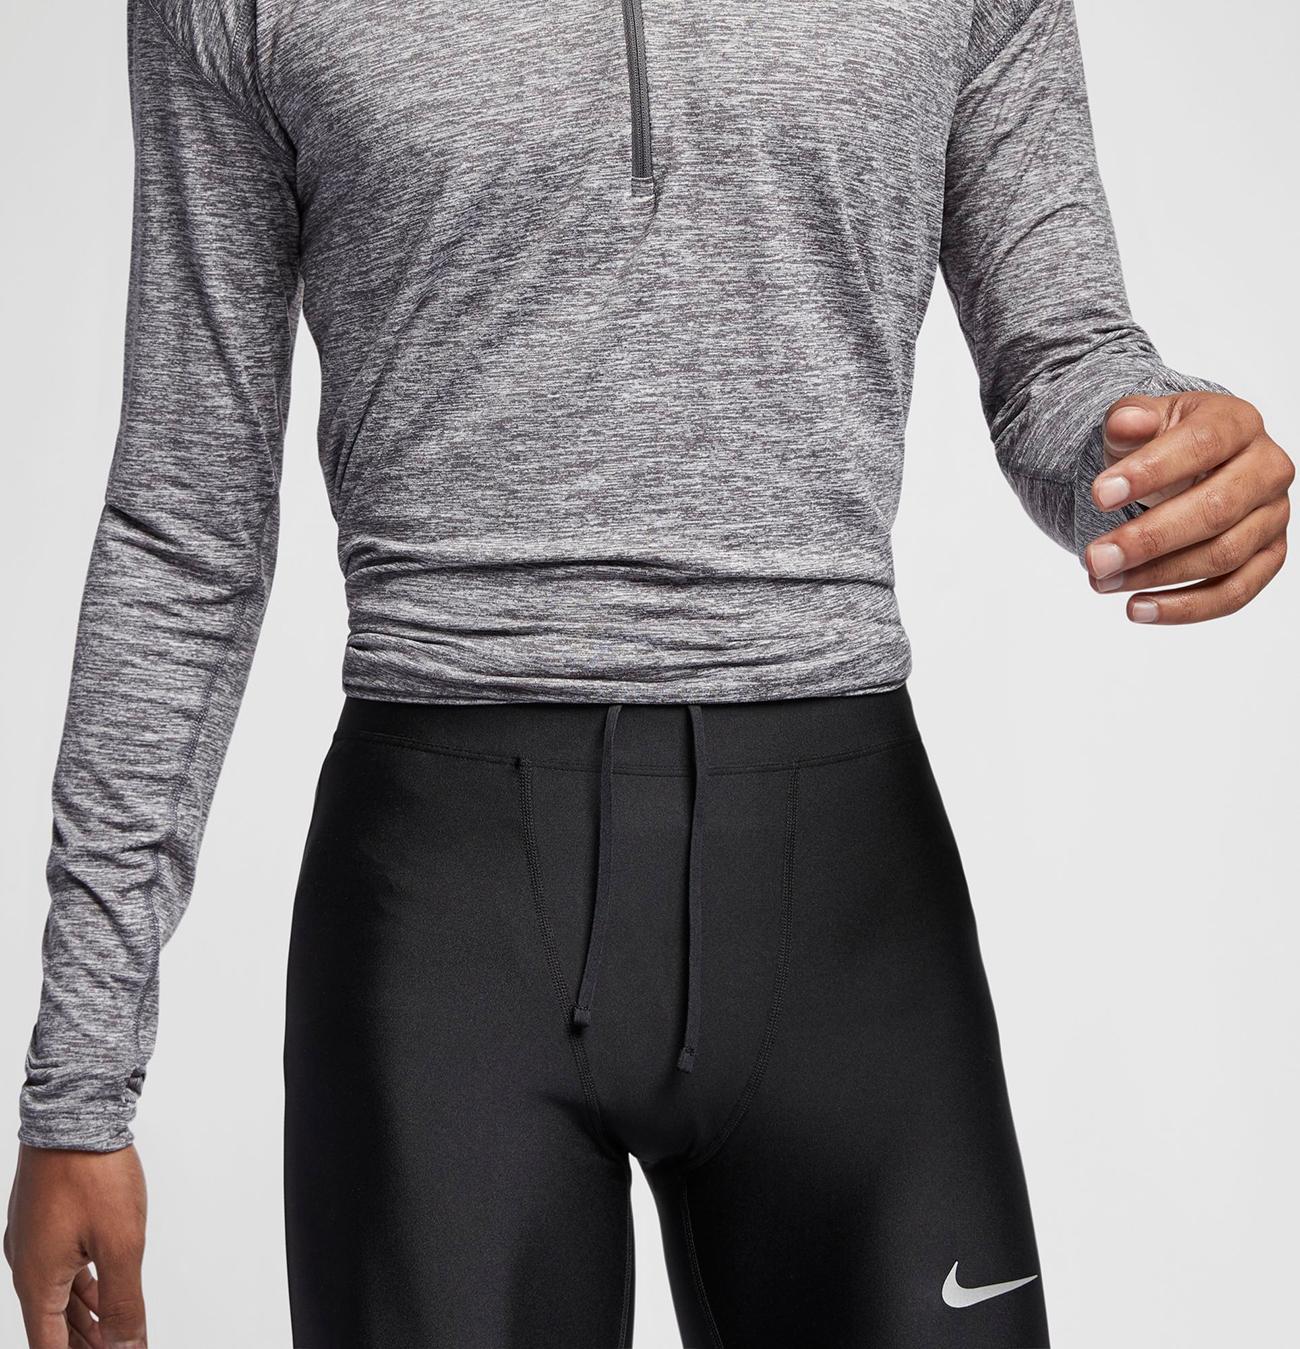 nike mobility tights